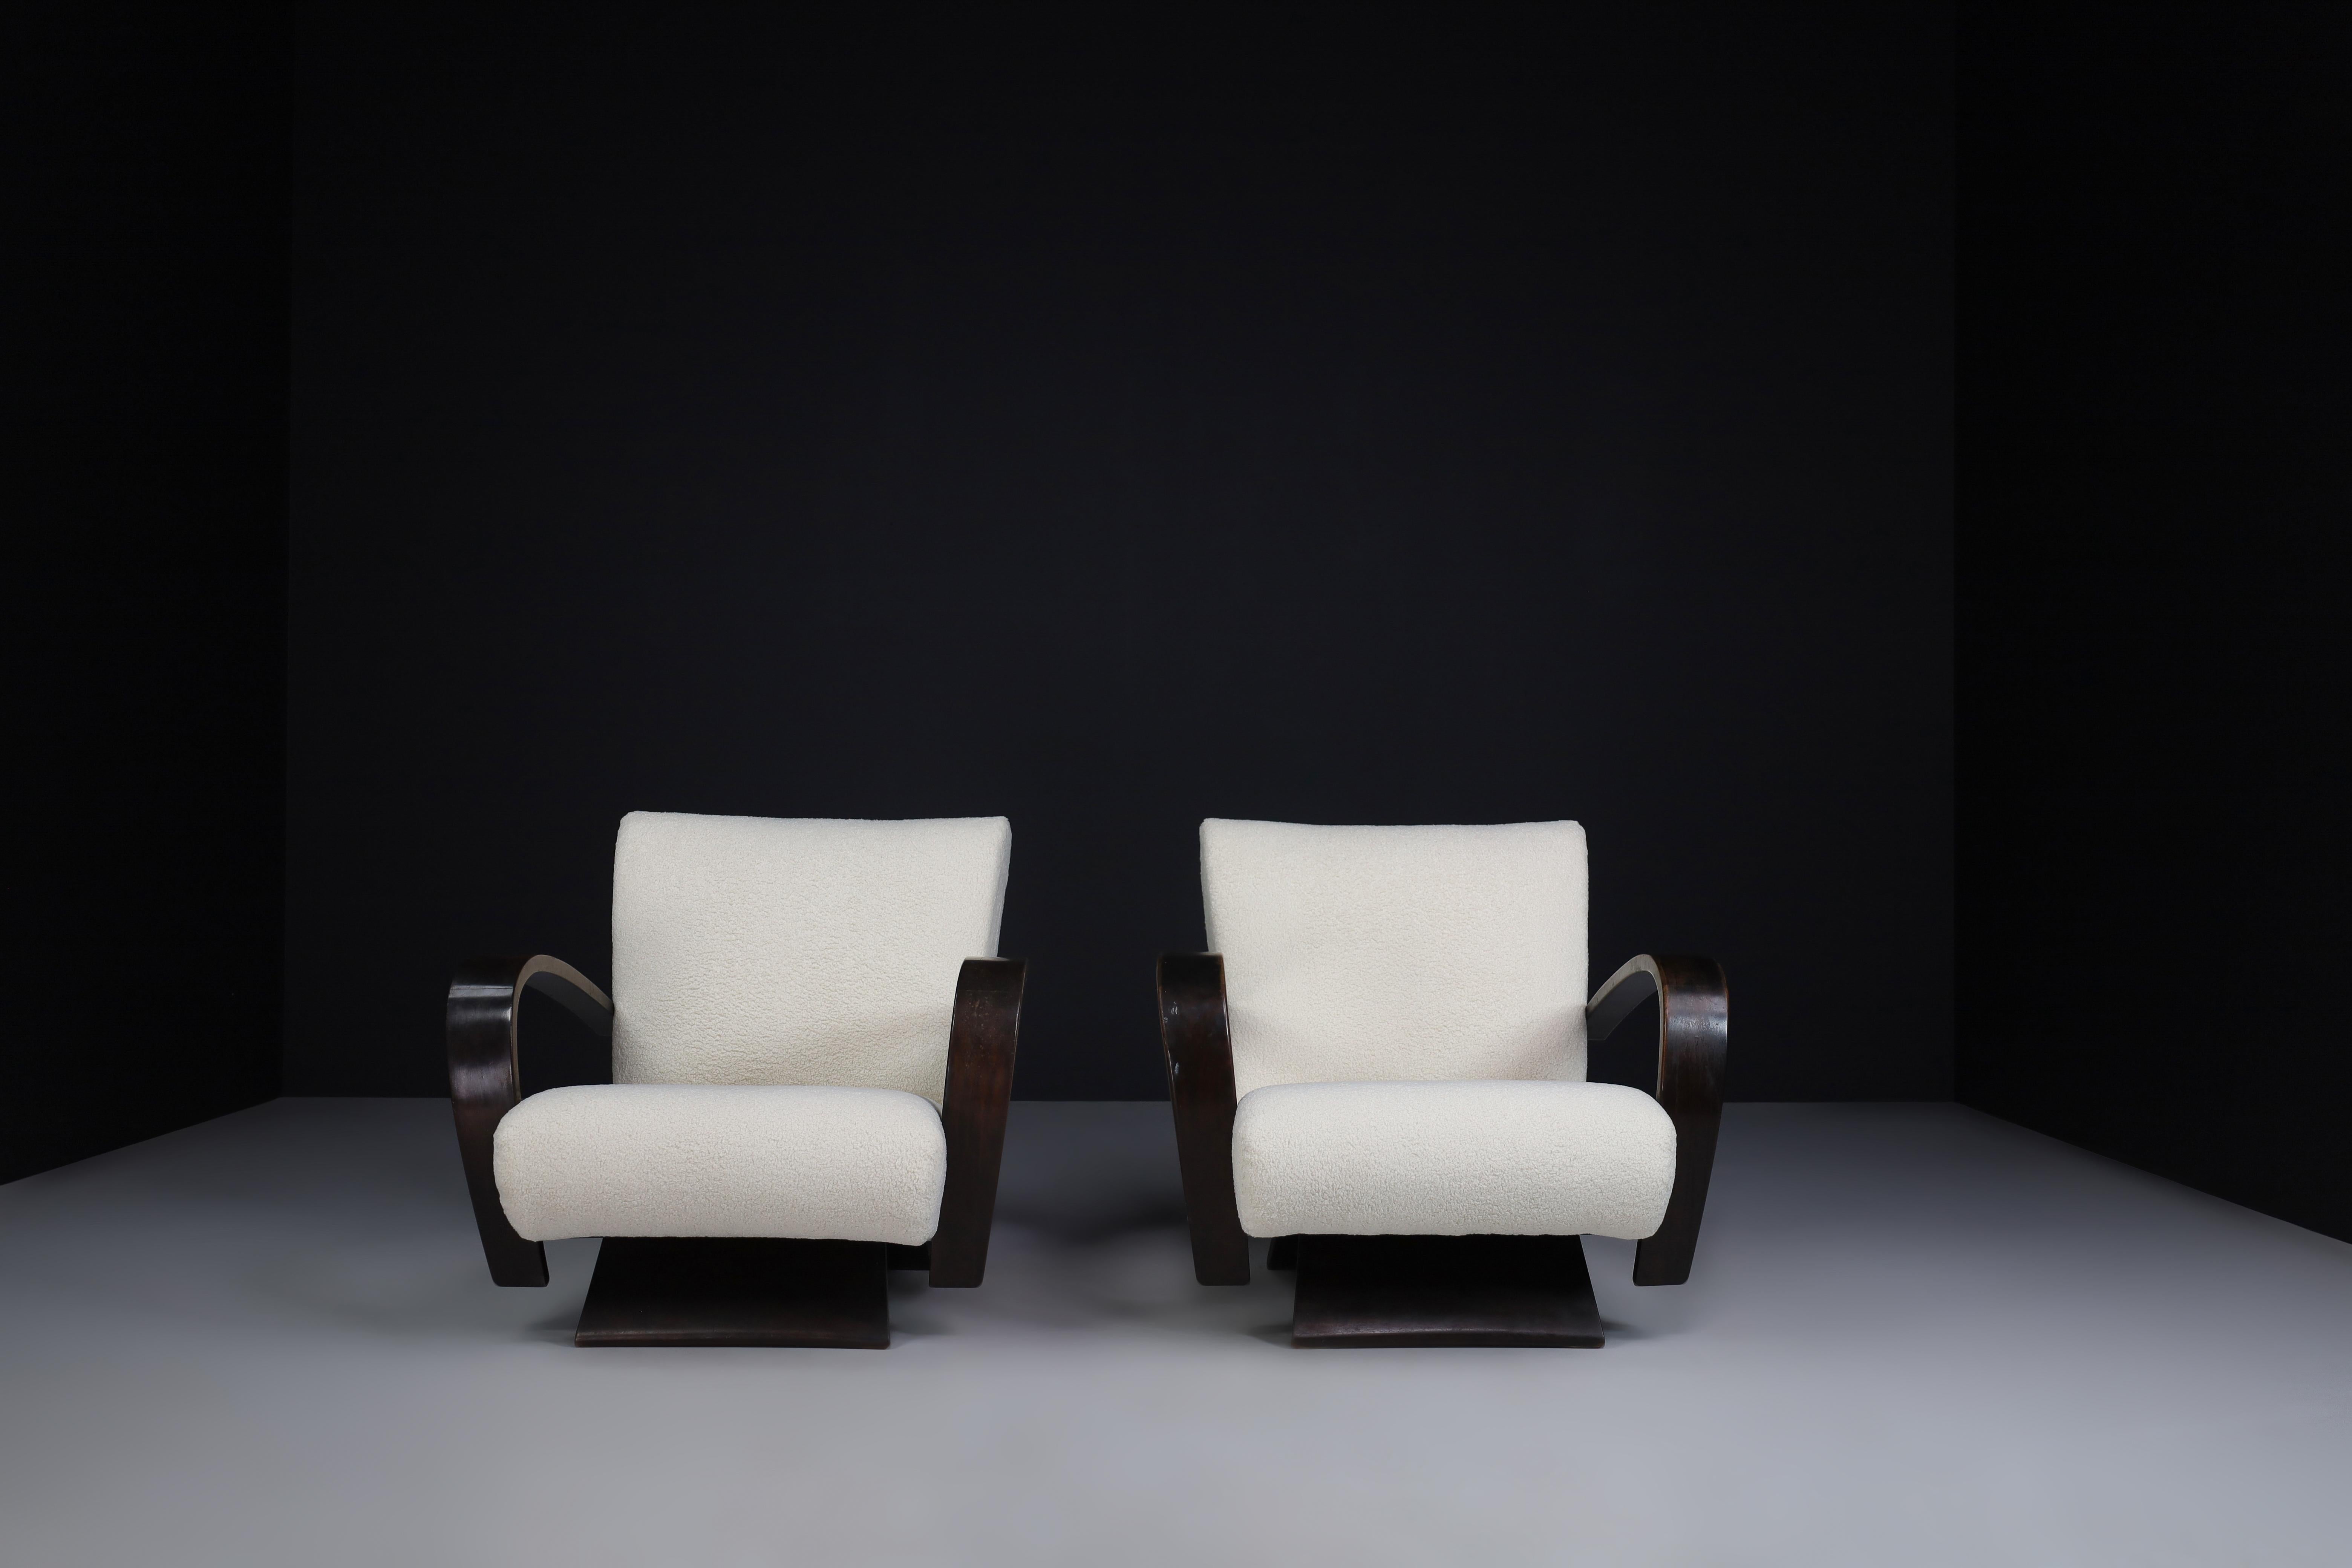 20th Century Art Deco Armchairs in Walnut and Teddy Upholstery, Italy, 1930s  For Sale